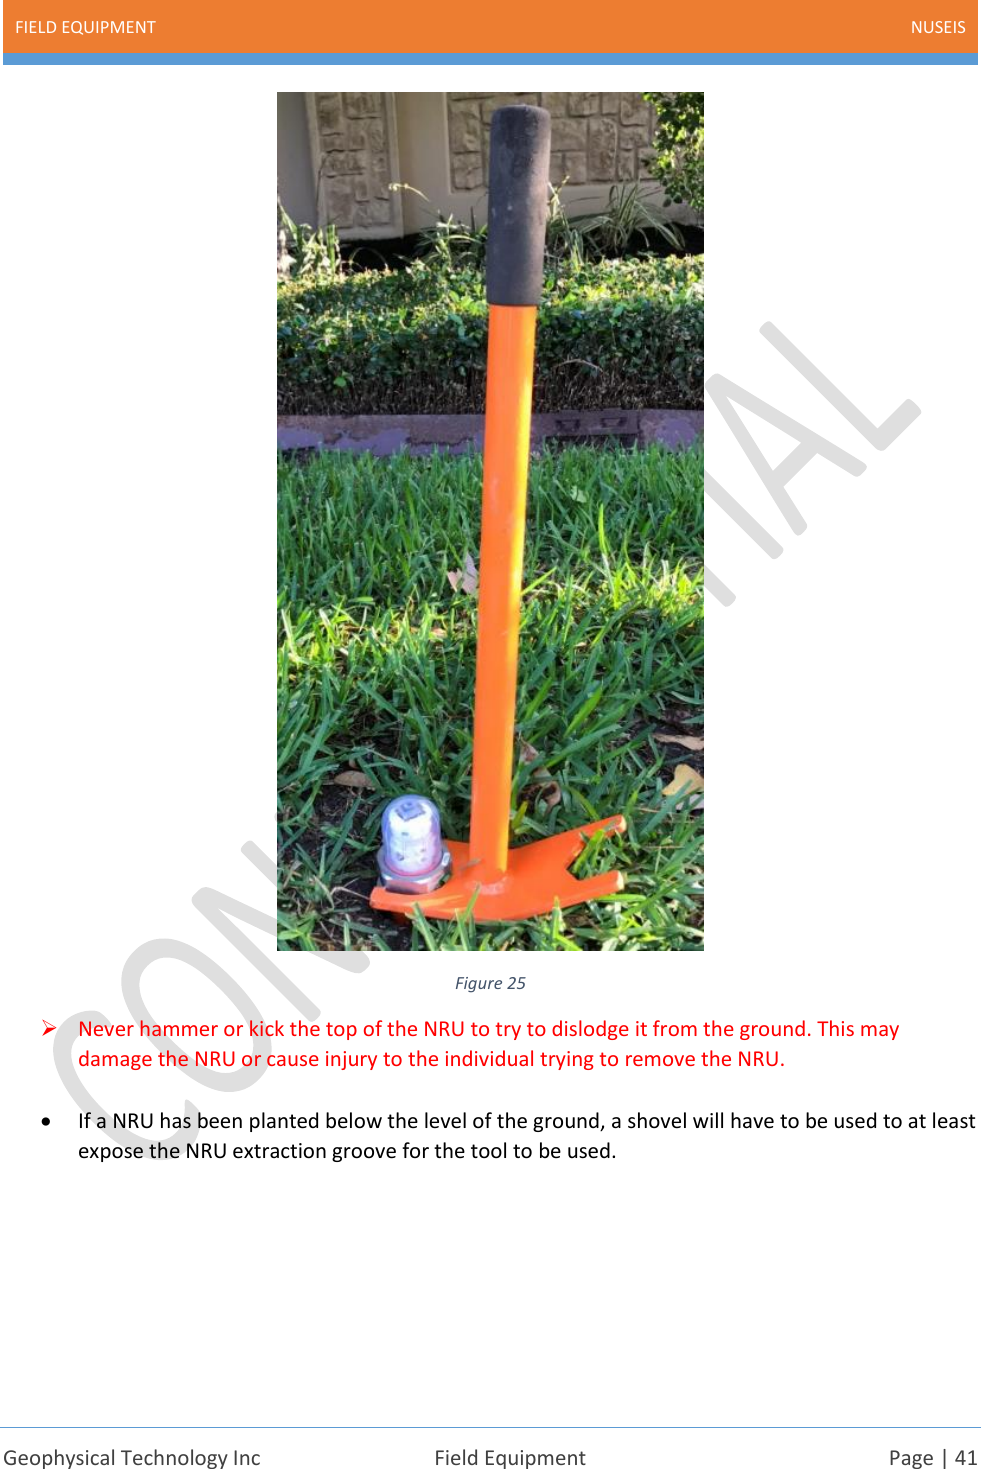 FIELD EQUIPMENT NUSEIS    Geophysical Technology Inc  Field Equipment  Page | 41   Figure 25 ➢ Never hammer or kick the top of the NRU to try to dislodge it from the ground. This may damage the NRU or cause injury to the individual trying to remove the NRU.  • If a NRU has been planted below the level of the ground, a shovel will have to be used to at least expose the NRU extraction groove for the tool to be used.     